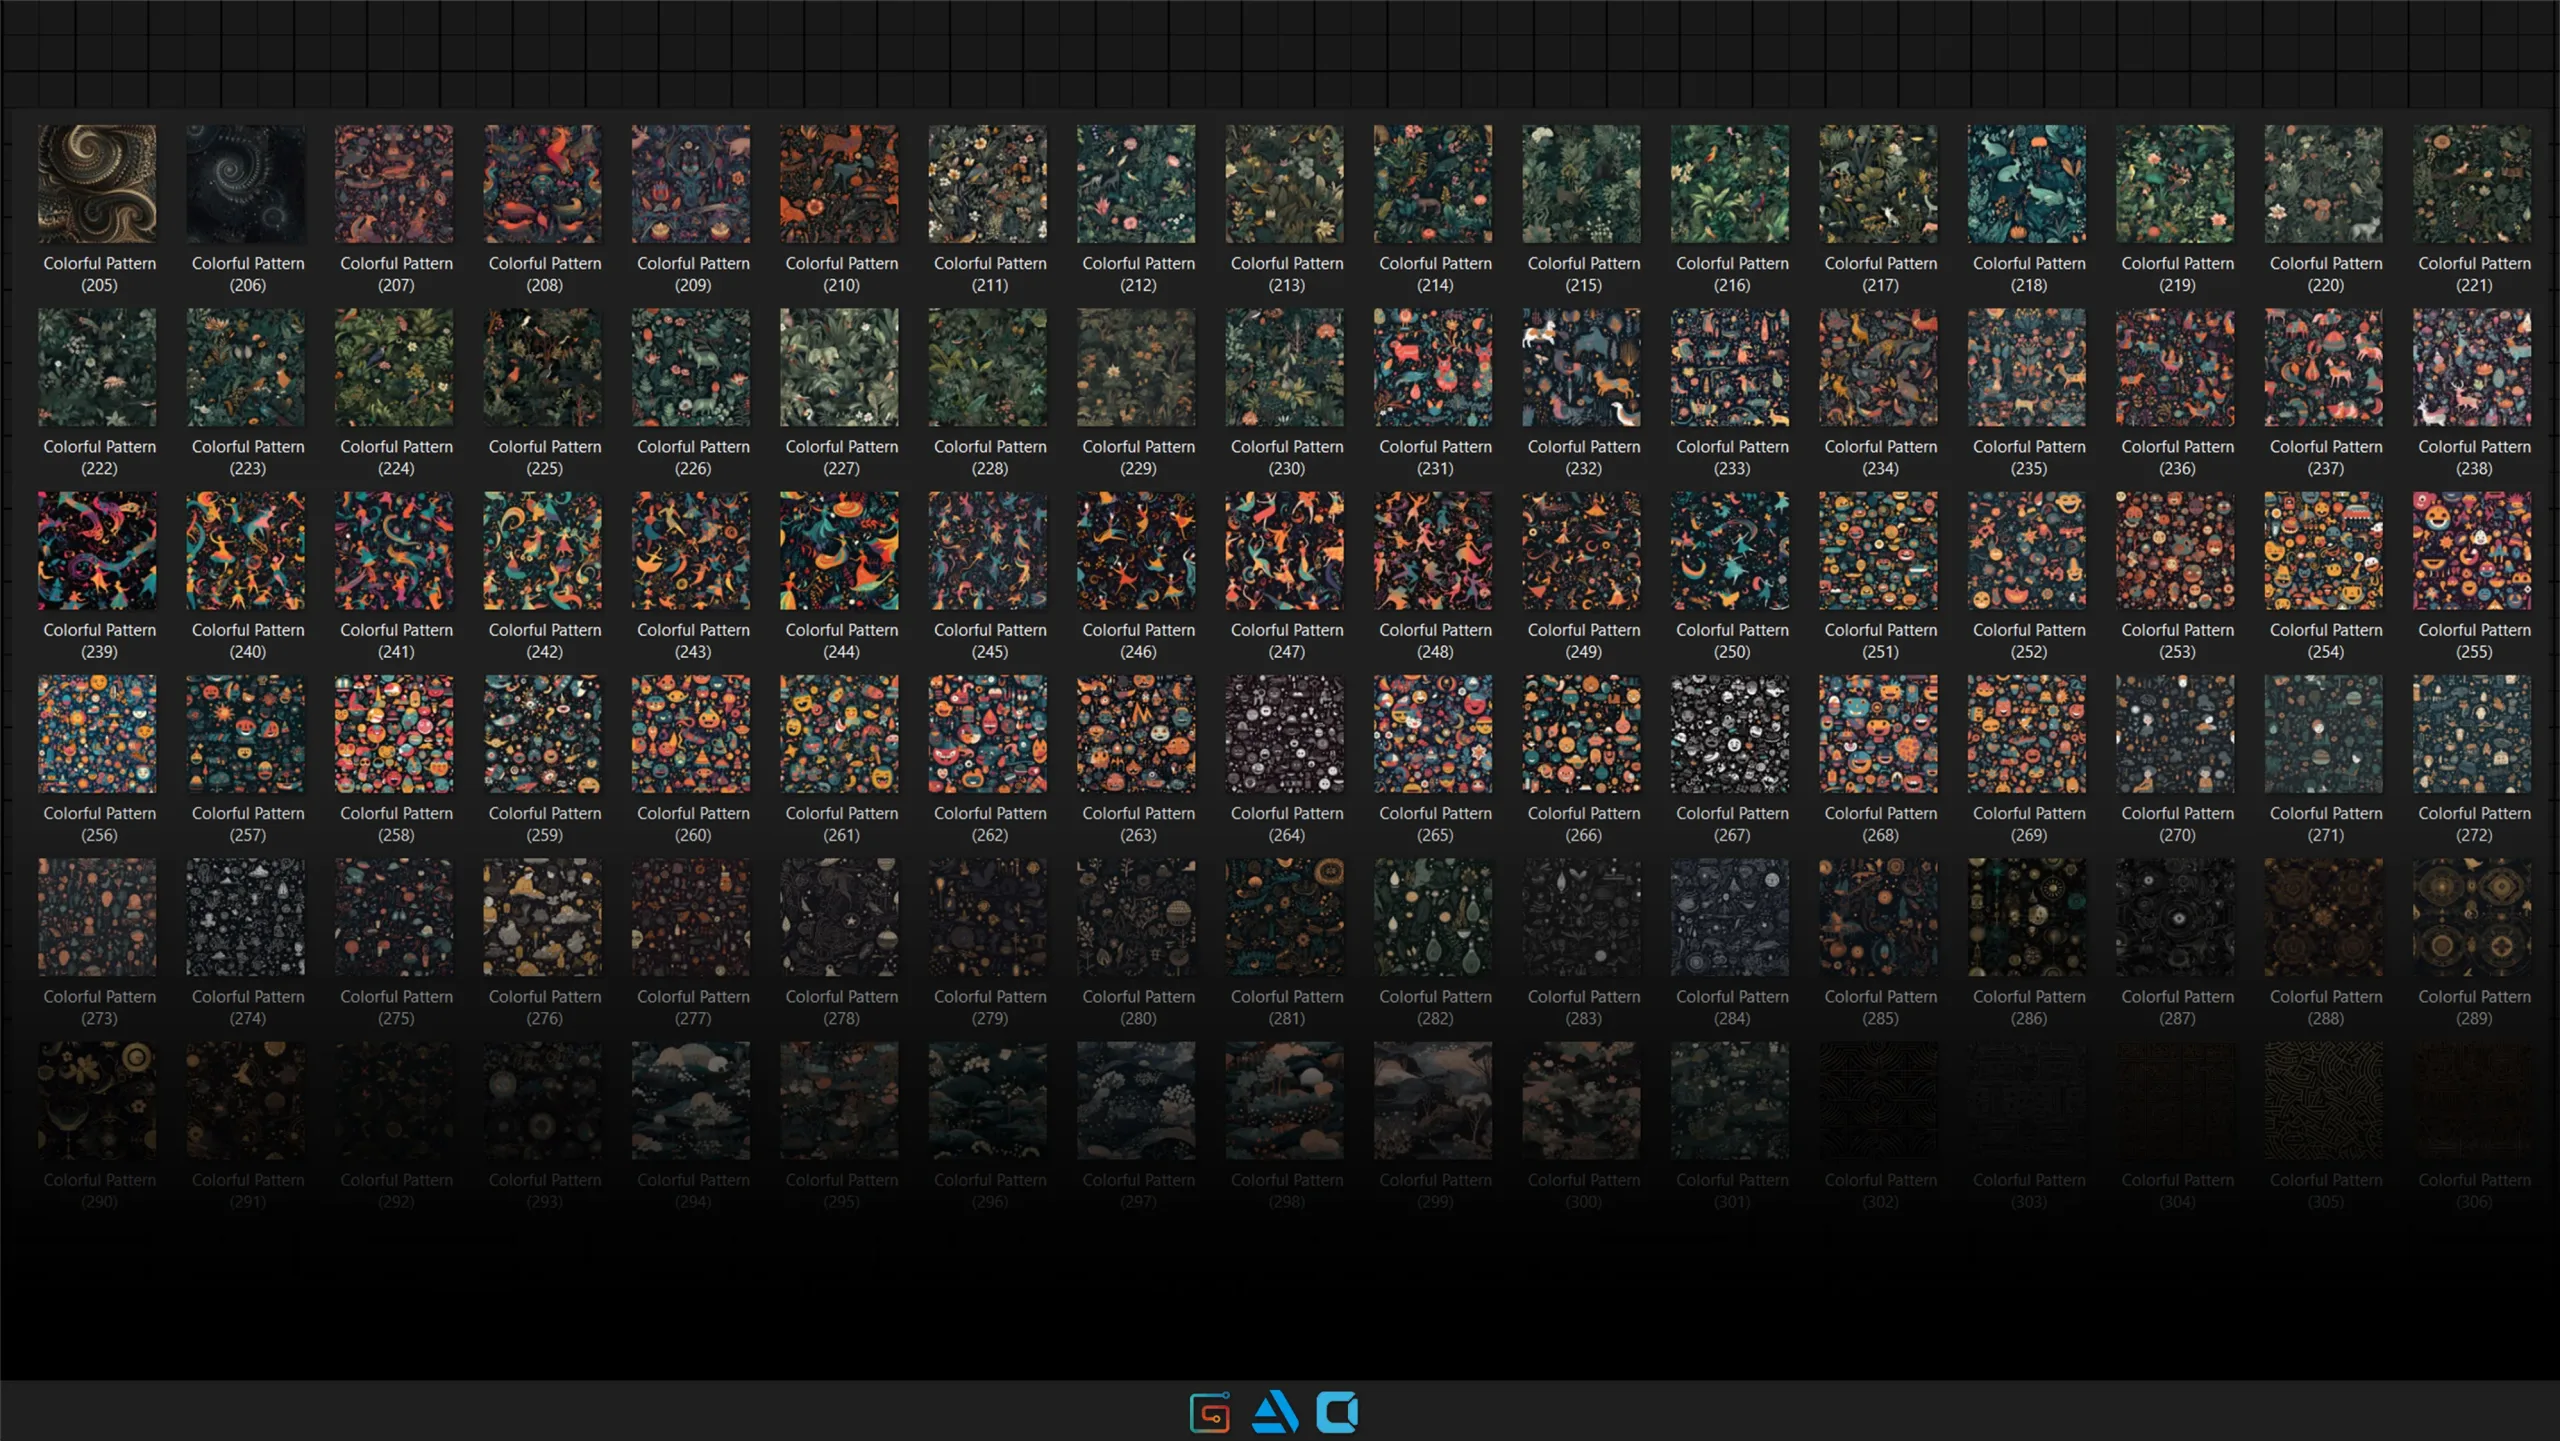 500 colorful pattern collection | 8K